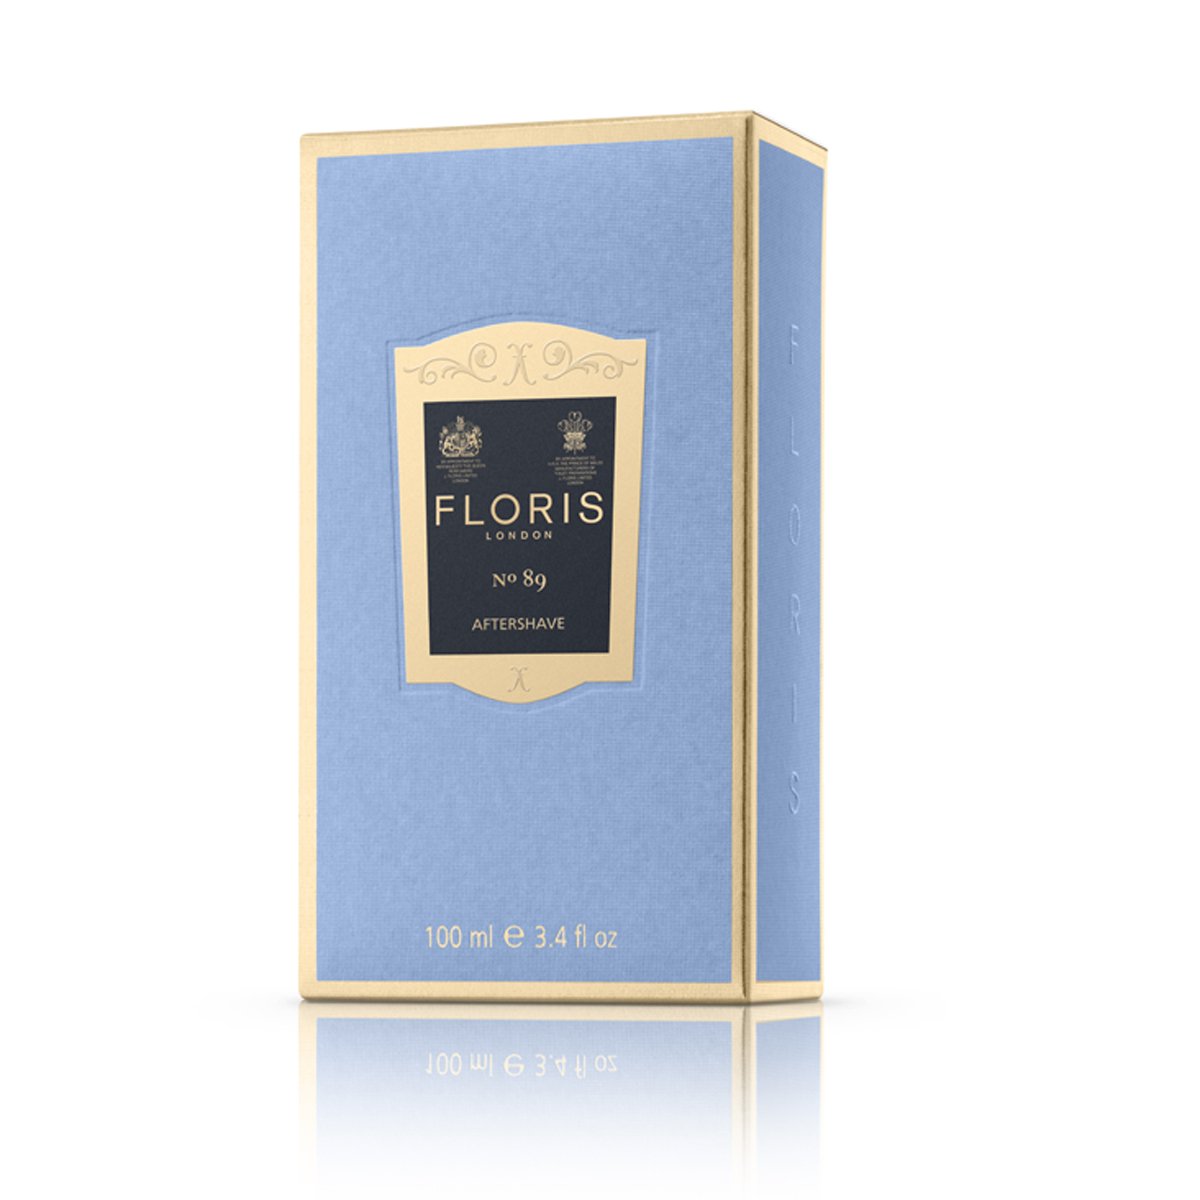 Large blue box with a navy and gold label, containing the No. 89 Aftershave